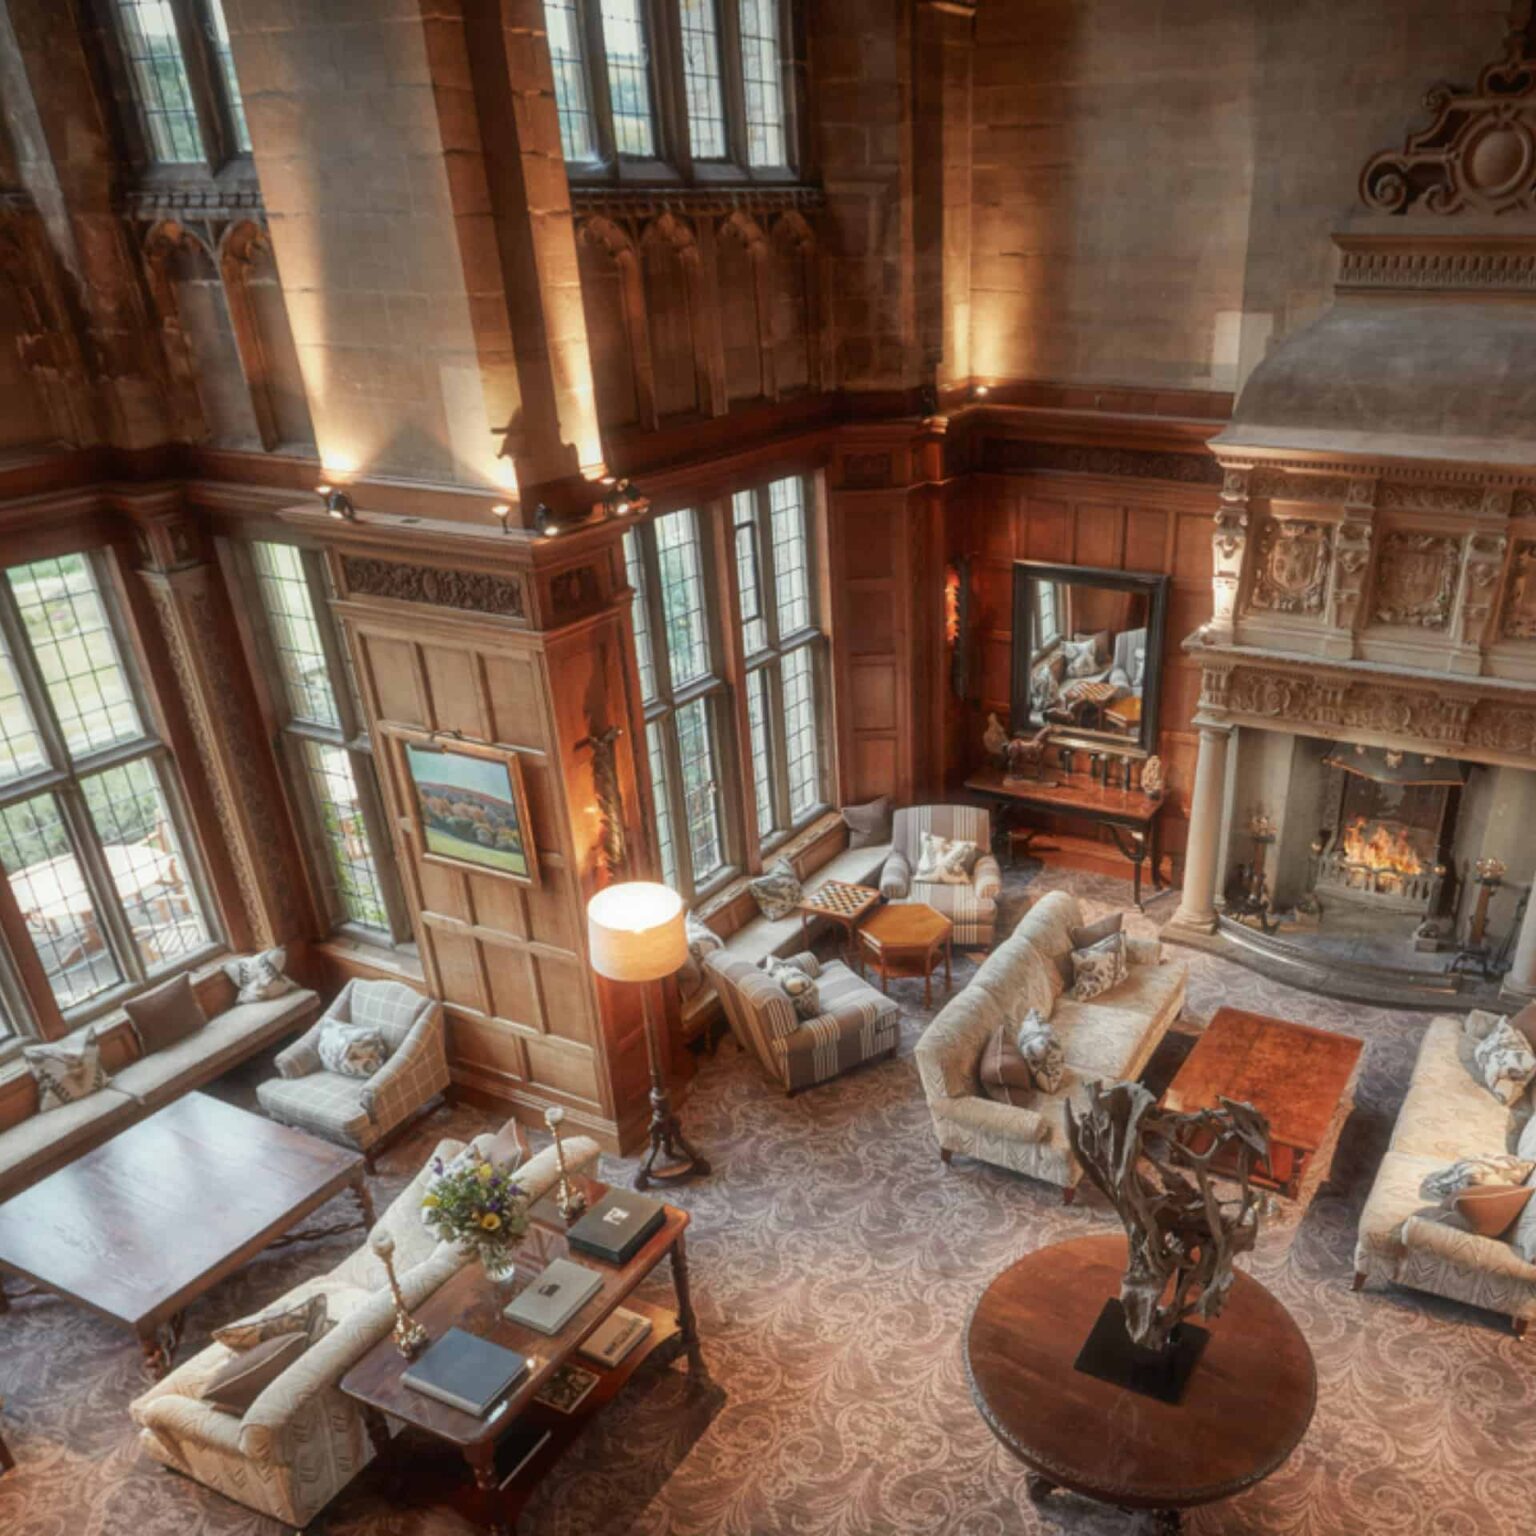 Bovey Castle interior grand living room with high ceiling and fireplace